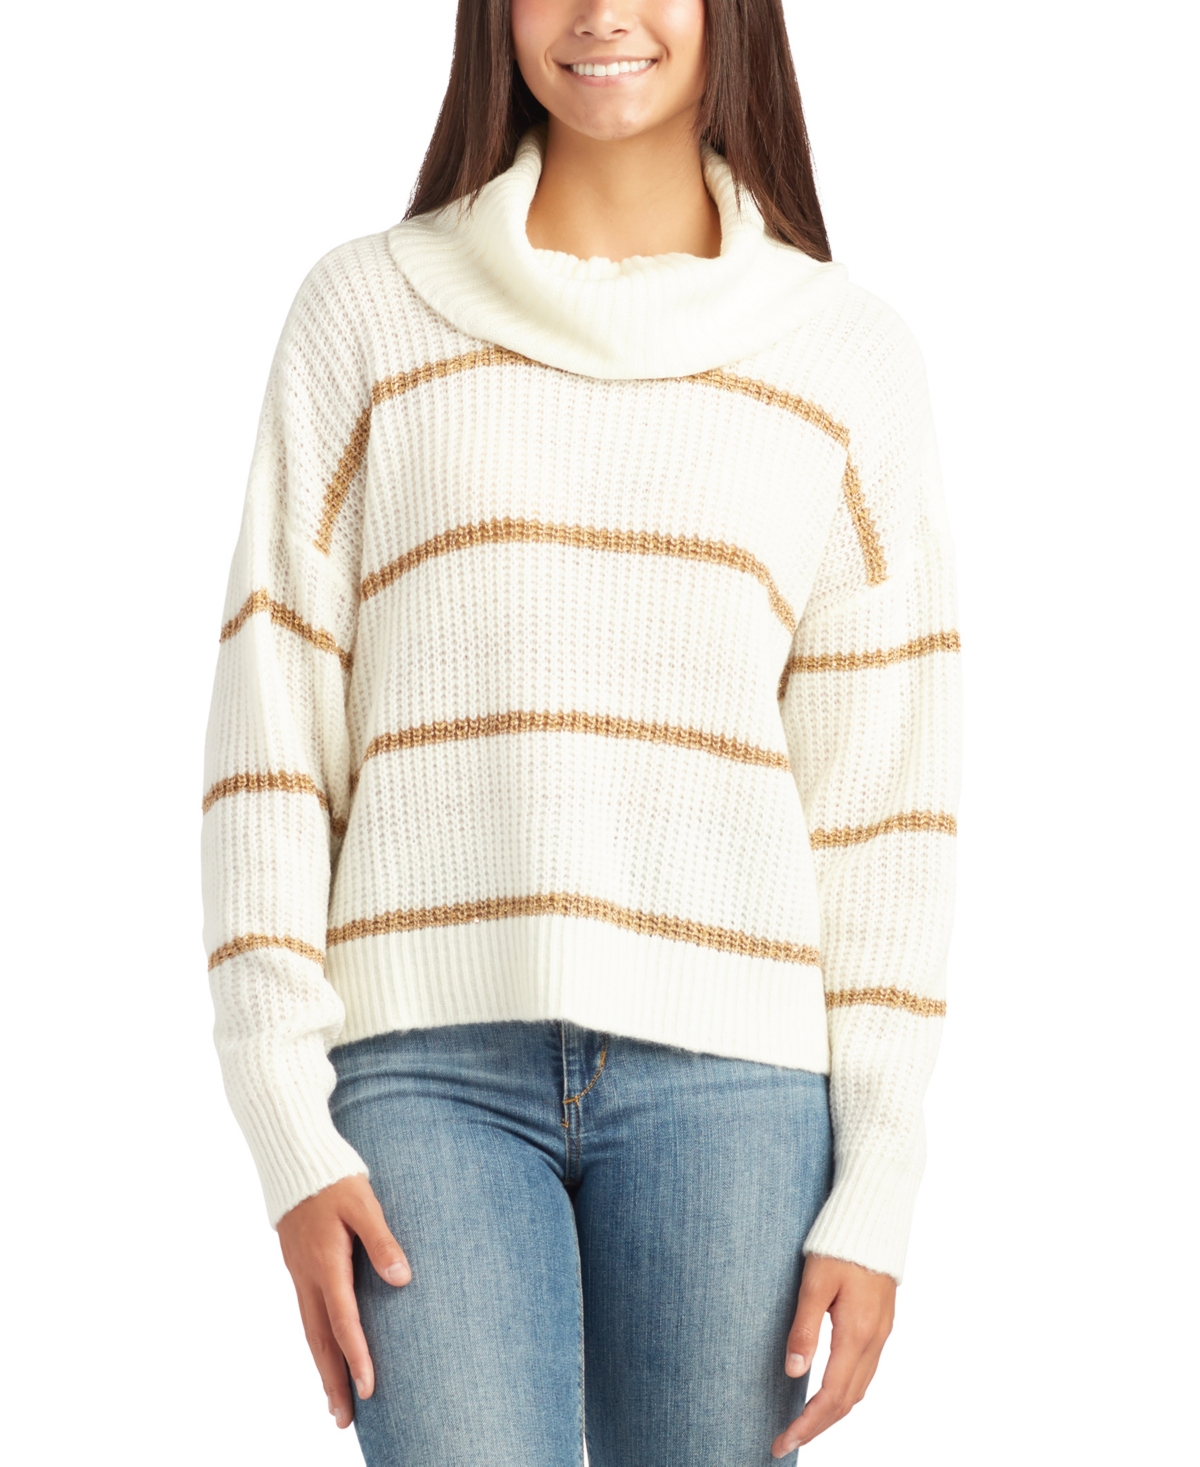 Juniors' Cowlneck Striped Sweater - Ivory